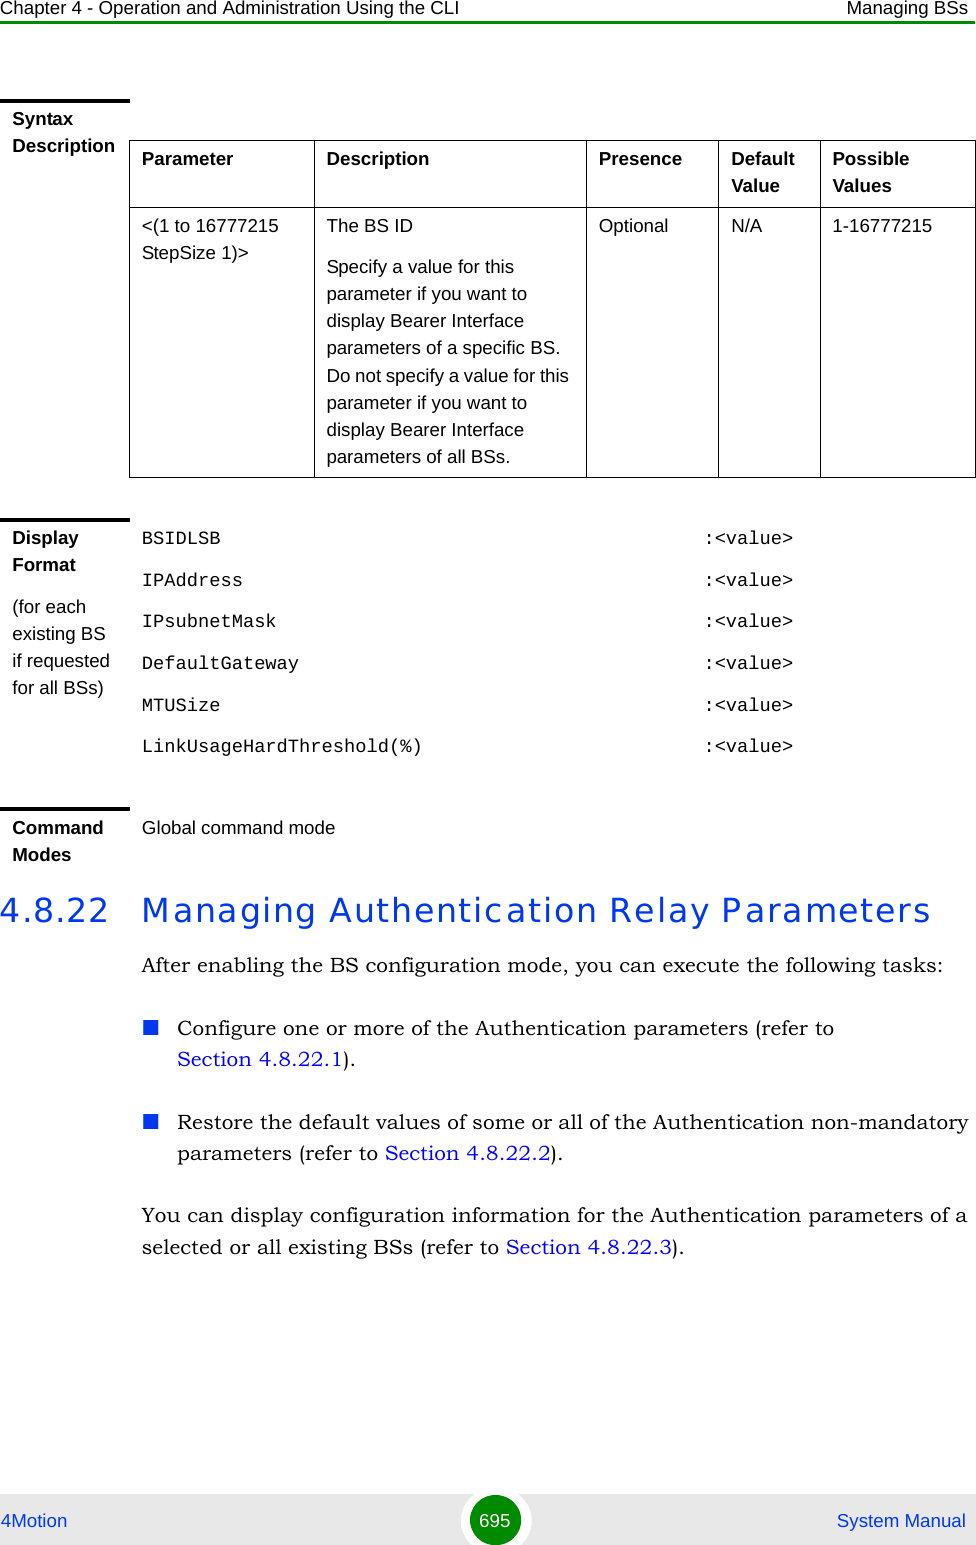 Chapter 4 - Operation and Administration Using the CLI Managing BSs4Motion 695  System Manual4.8.22 Managing Authentication Relay ParametersAfter enabling the BS configuration mode, you can execute the following tasks:Configure one or more of the Authentication parameters (refer to Section 4.8.22.1).Restore the default values of some or all of the Authentication non-mandatory parameters (refer to Section 4.8.22.2).You can display configuration information for the Authentication parameters of a selected or all existing BSs (refer to Section 4.8.22.3).Syntax Description Parameter Description Presence Default ValuePossible Values&lt;(1 to 16777215 StepSize 1)&gt;The BS ID Specify a value for this parameter if you want to display Bearer Interface parameters of a specific BS. Do not specify a value for this parameter if you want to display Bearer Interface parameters of all BSs.Optional N/A 1-16777215Display Format(for each existing BS if requested for all BSs)BSIDLSB                                           :&lt;value&gt;IPAddress                                         :&lt;value&gt;IPsubnetMask                                      :&lt;value&gt;DefaultGateway                                    :&lt;value&gt;MTUSize                                           :&lt;value&gt;LinkUsageHardThreshold(%)                         :&lt;value&gt;Command ModesGlobal command mode